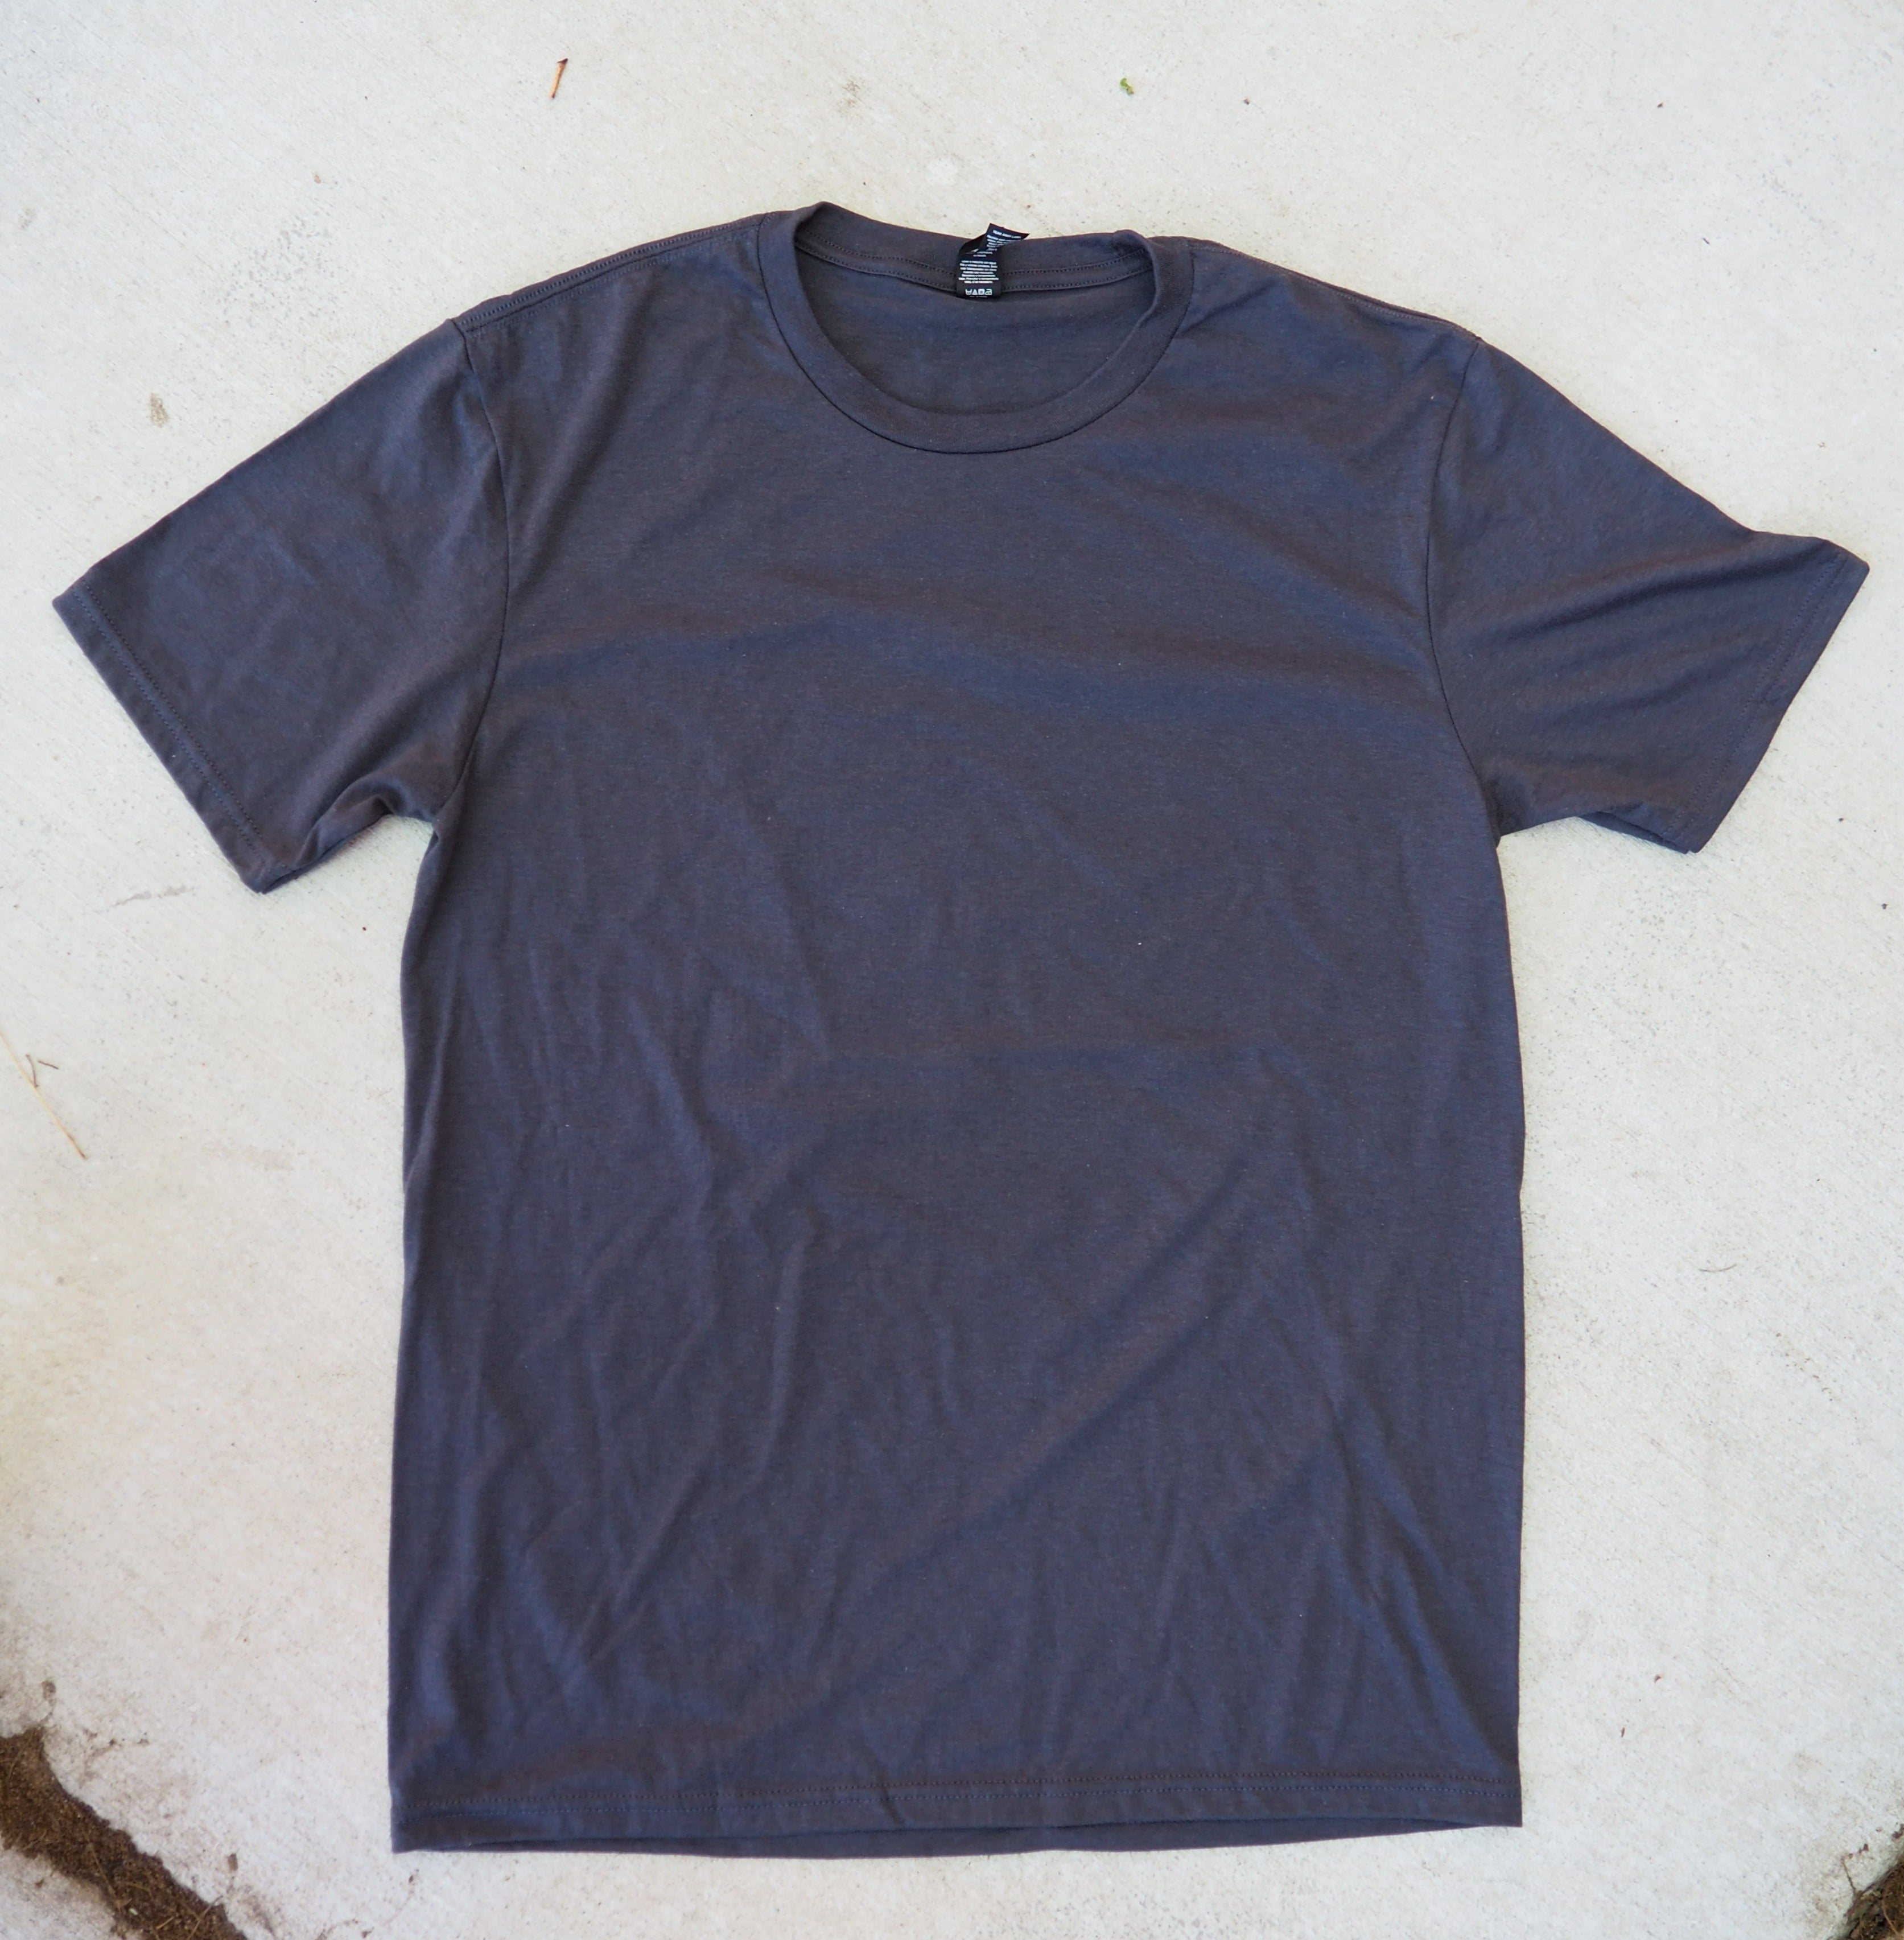 Front side of Charcoal gray t shirt